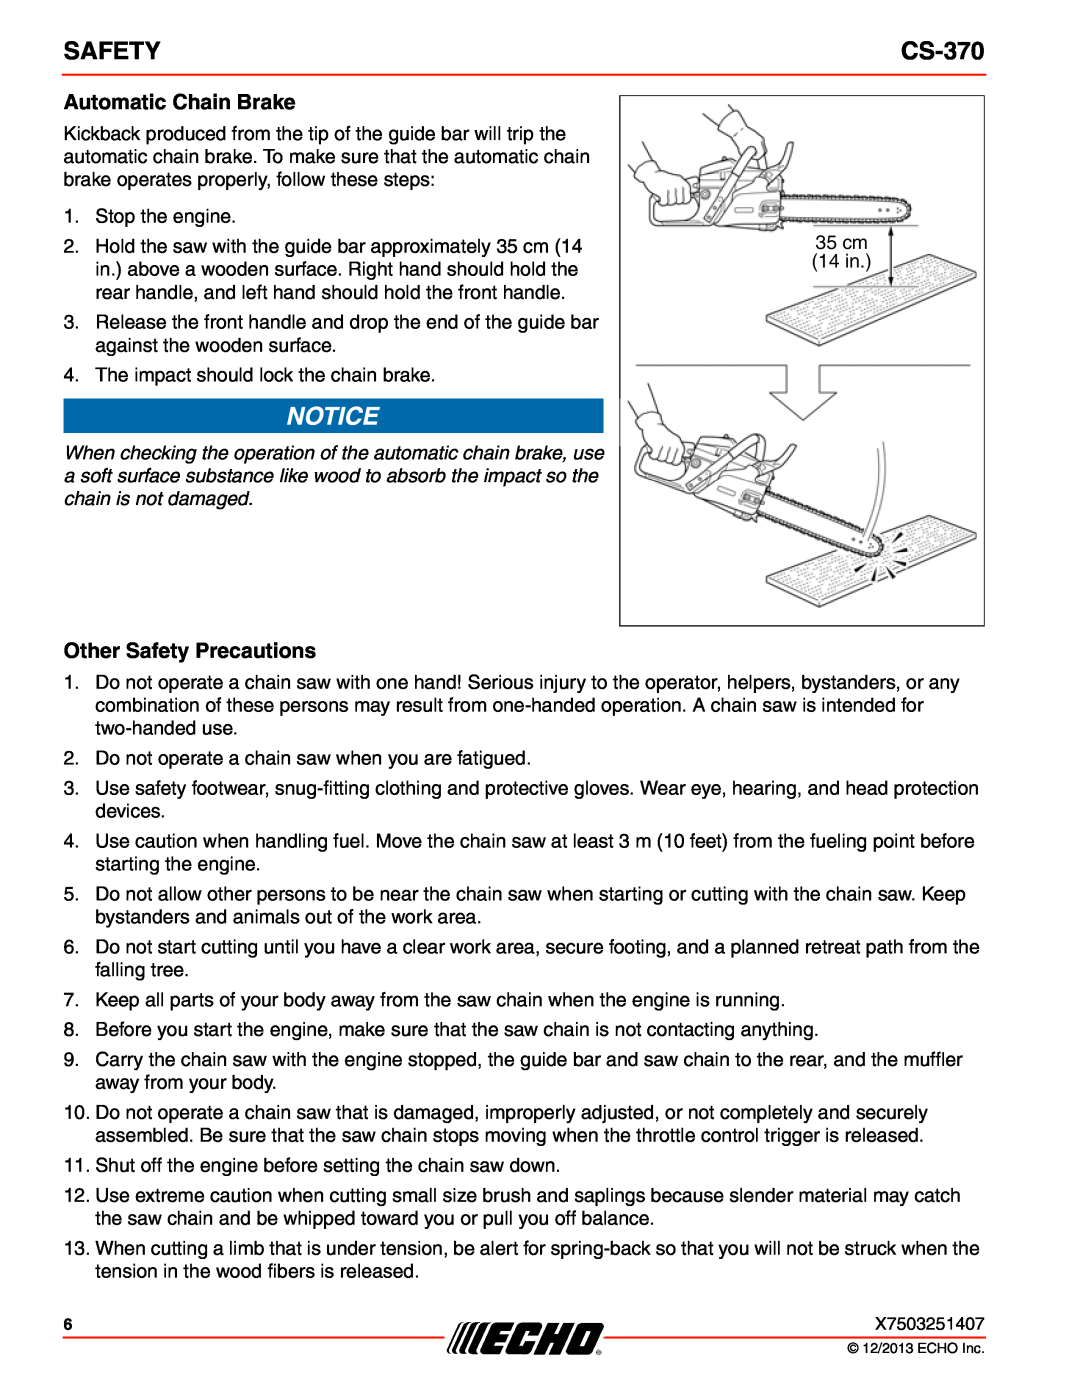 Echo CS-370 instruction manual Automatic Chain Brake, Other Safety Precautions 